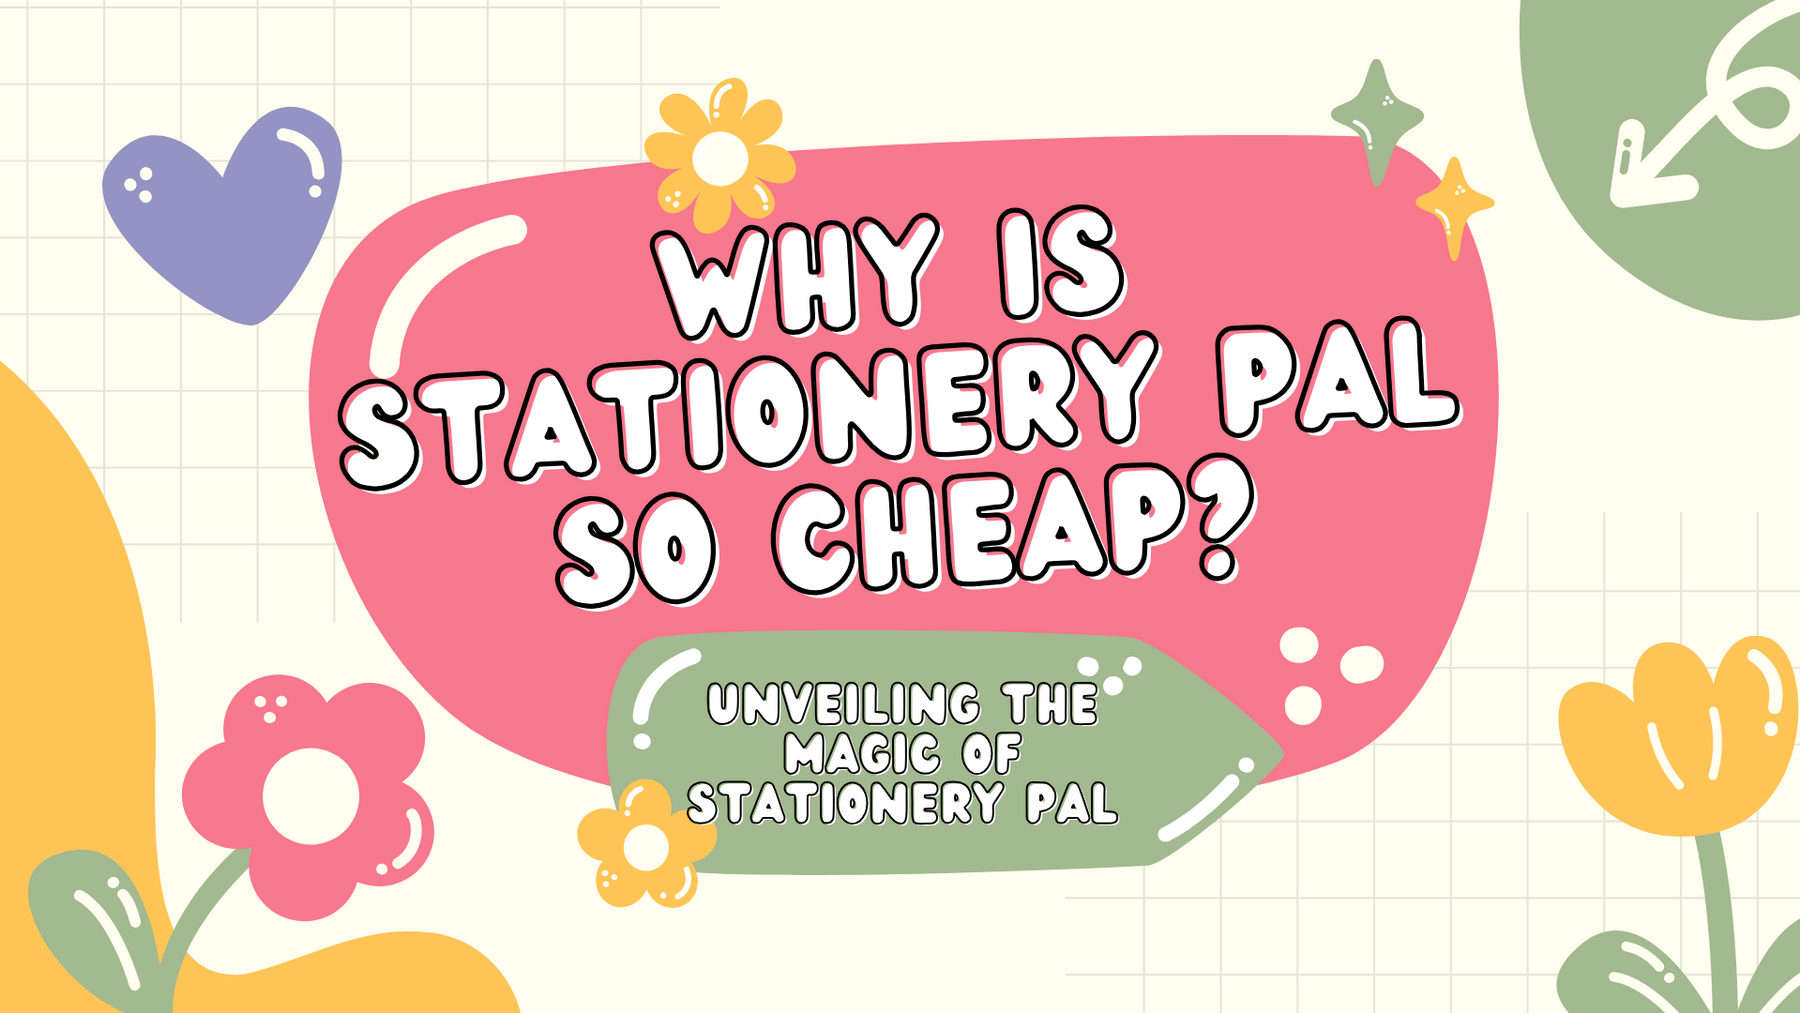 Why is Stationery Pal so Cheap?